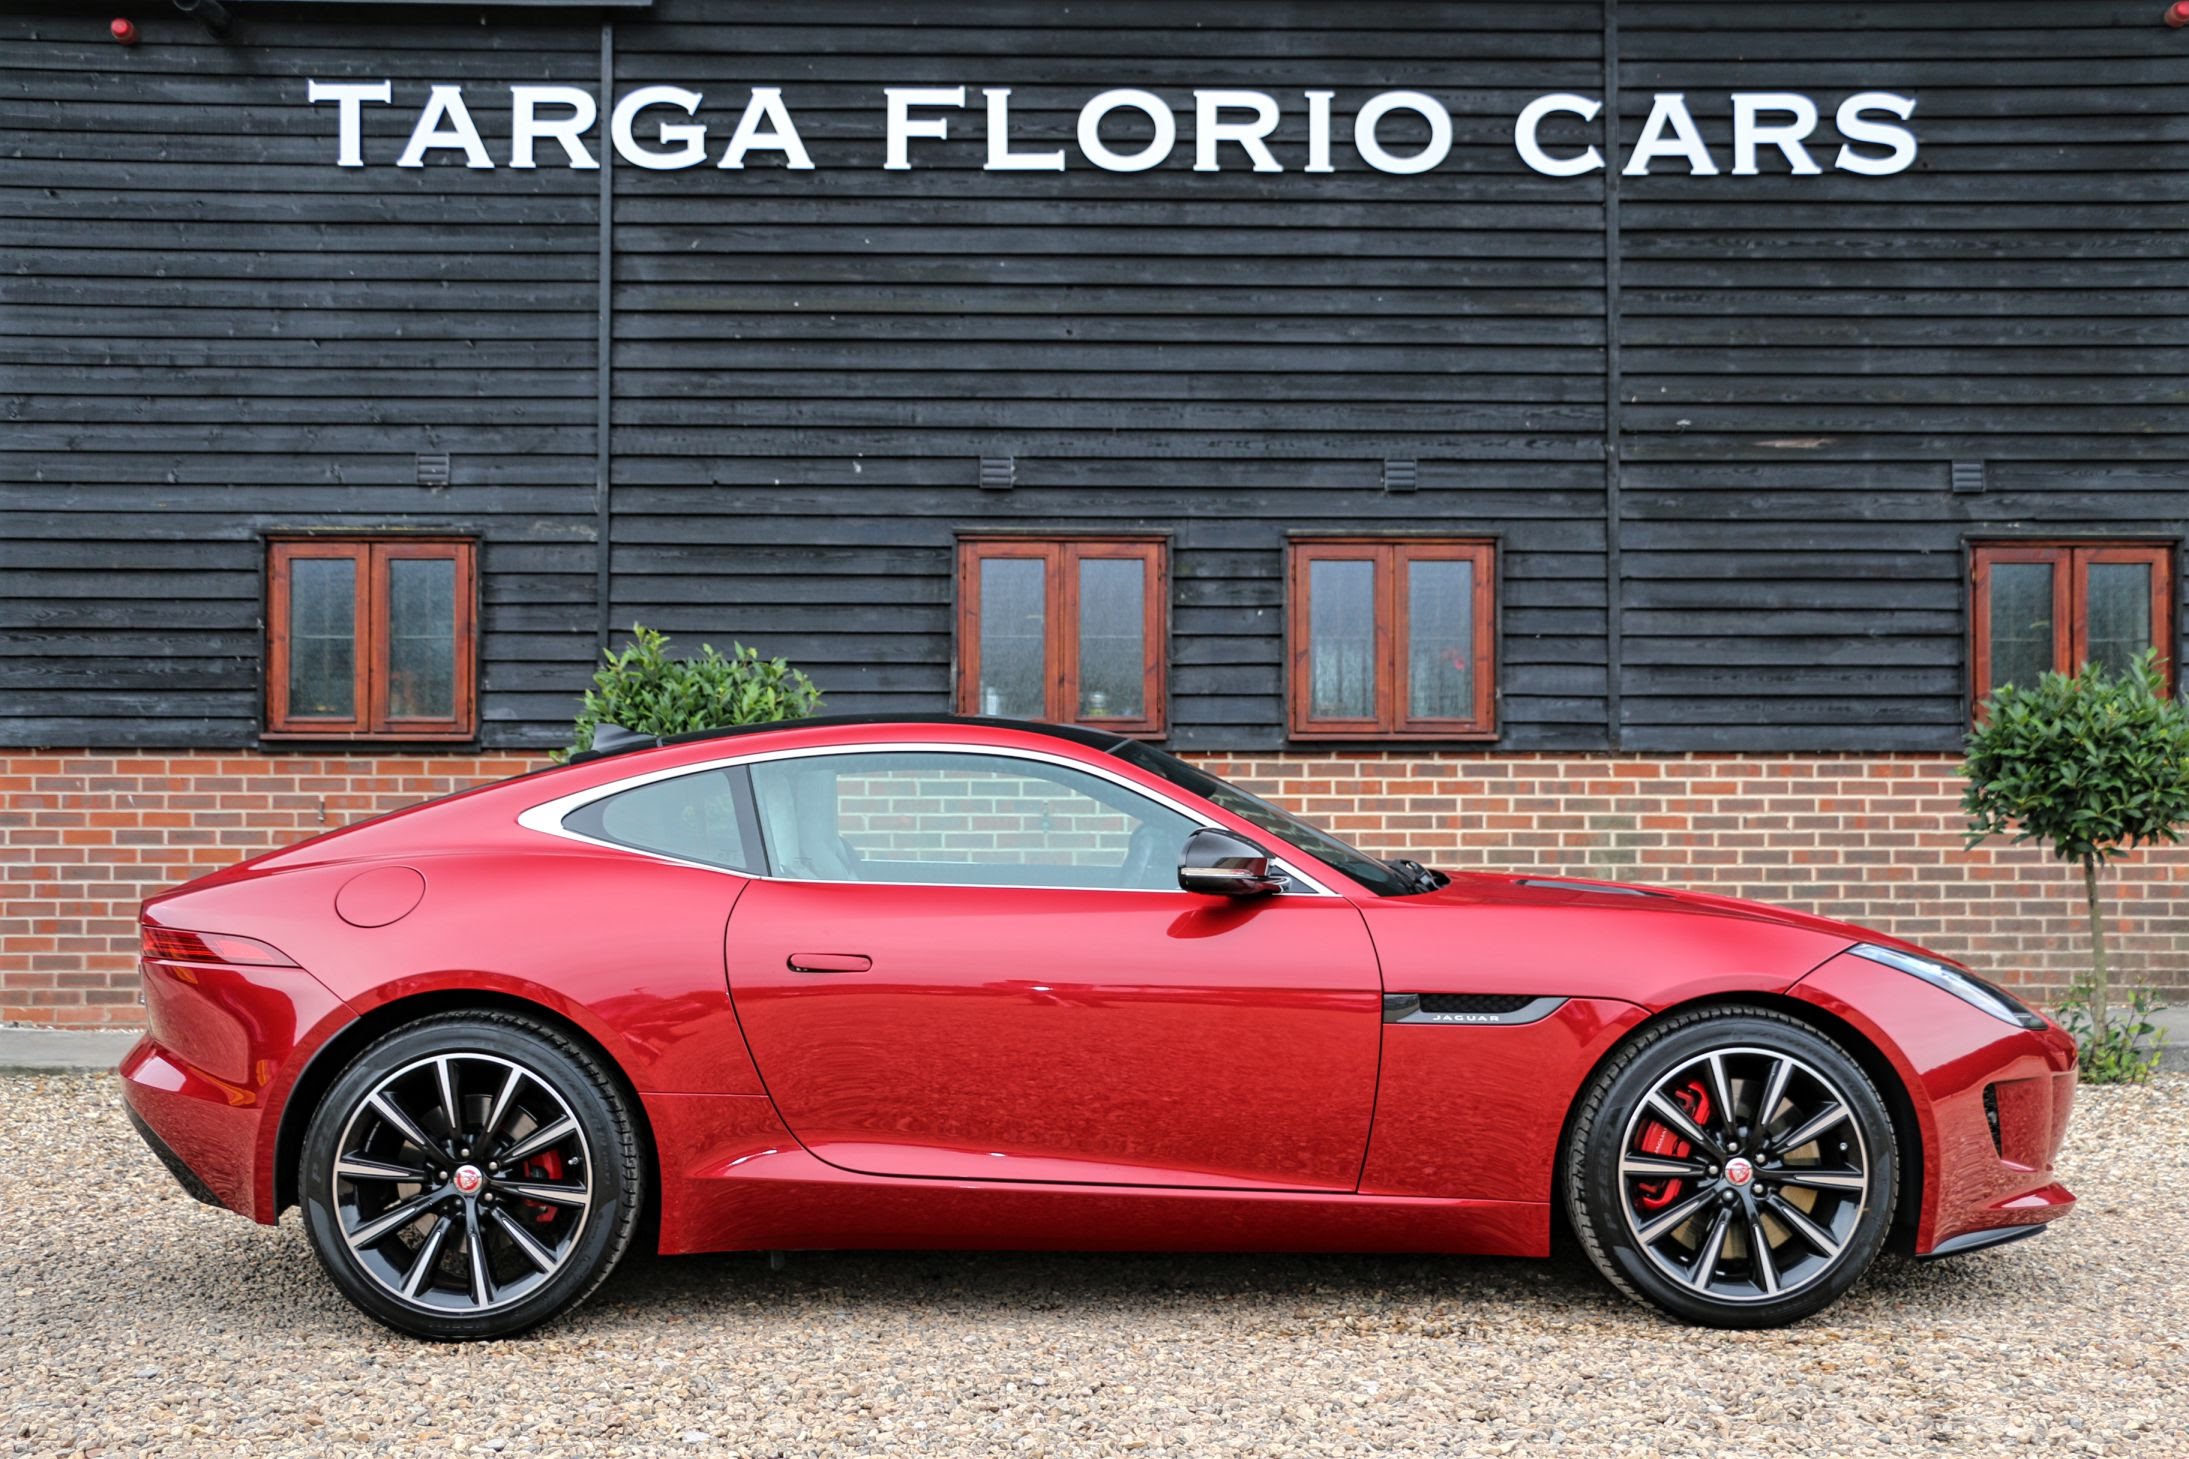 Jaguar F-Type V6 S Coupé finished in Italian Racing Red - YouTube